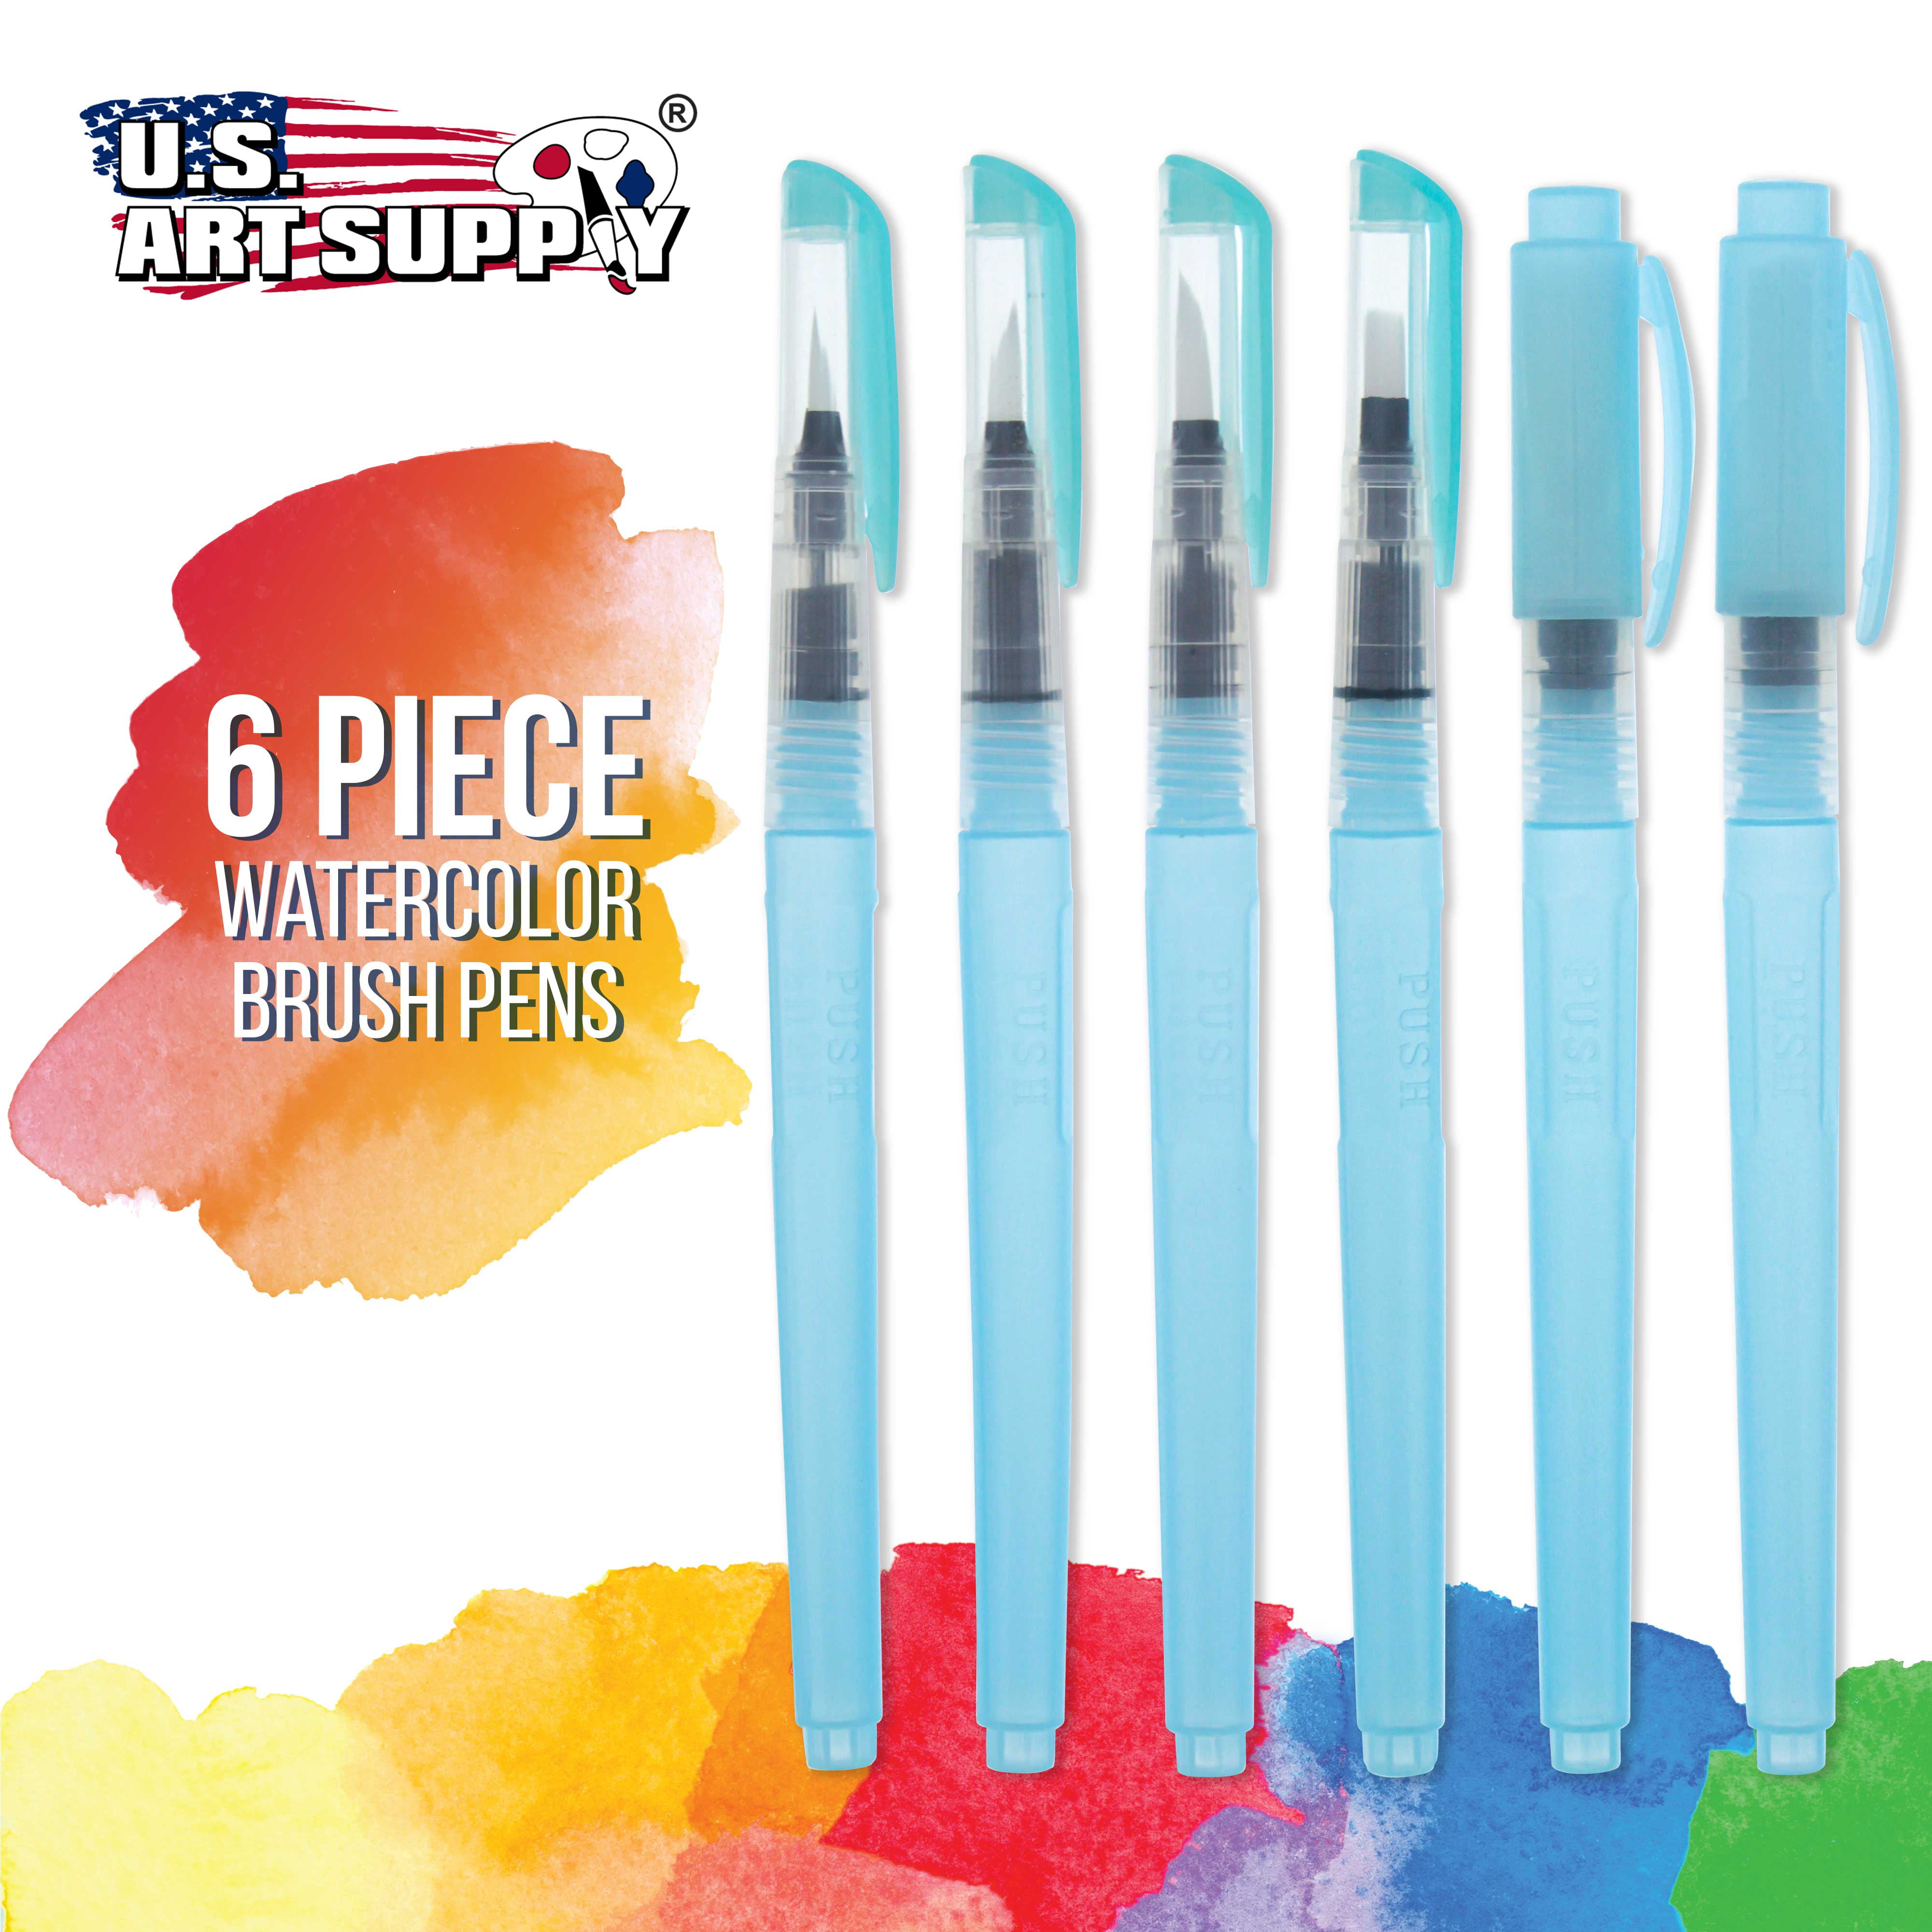 Watercolor Brush Pens Set - Super Easy to Use and Fill, Watercolor Pens  Brush Set of 9 Piece for Water Soluble Colored Pencil, Aqua Brush Pen for